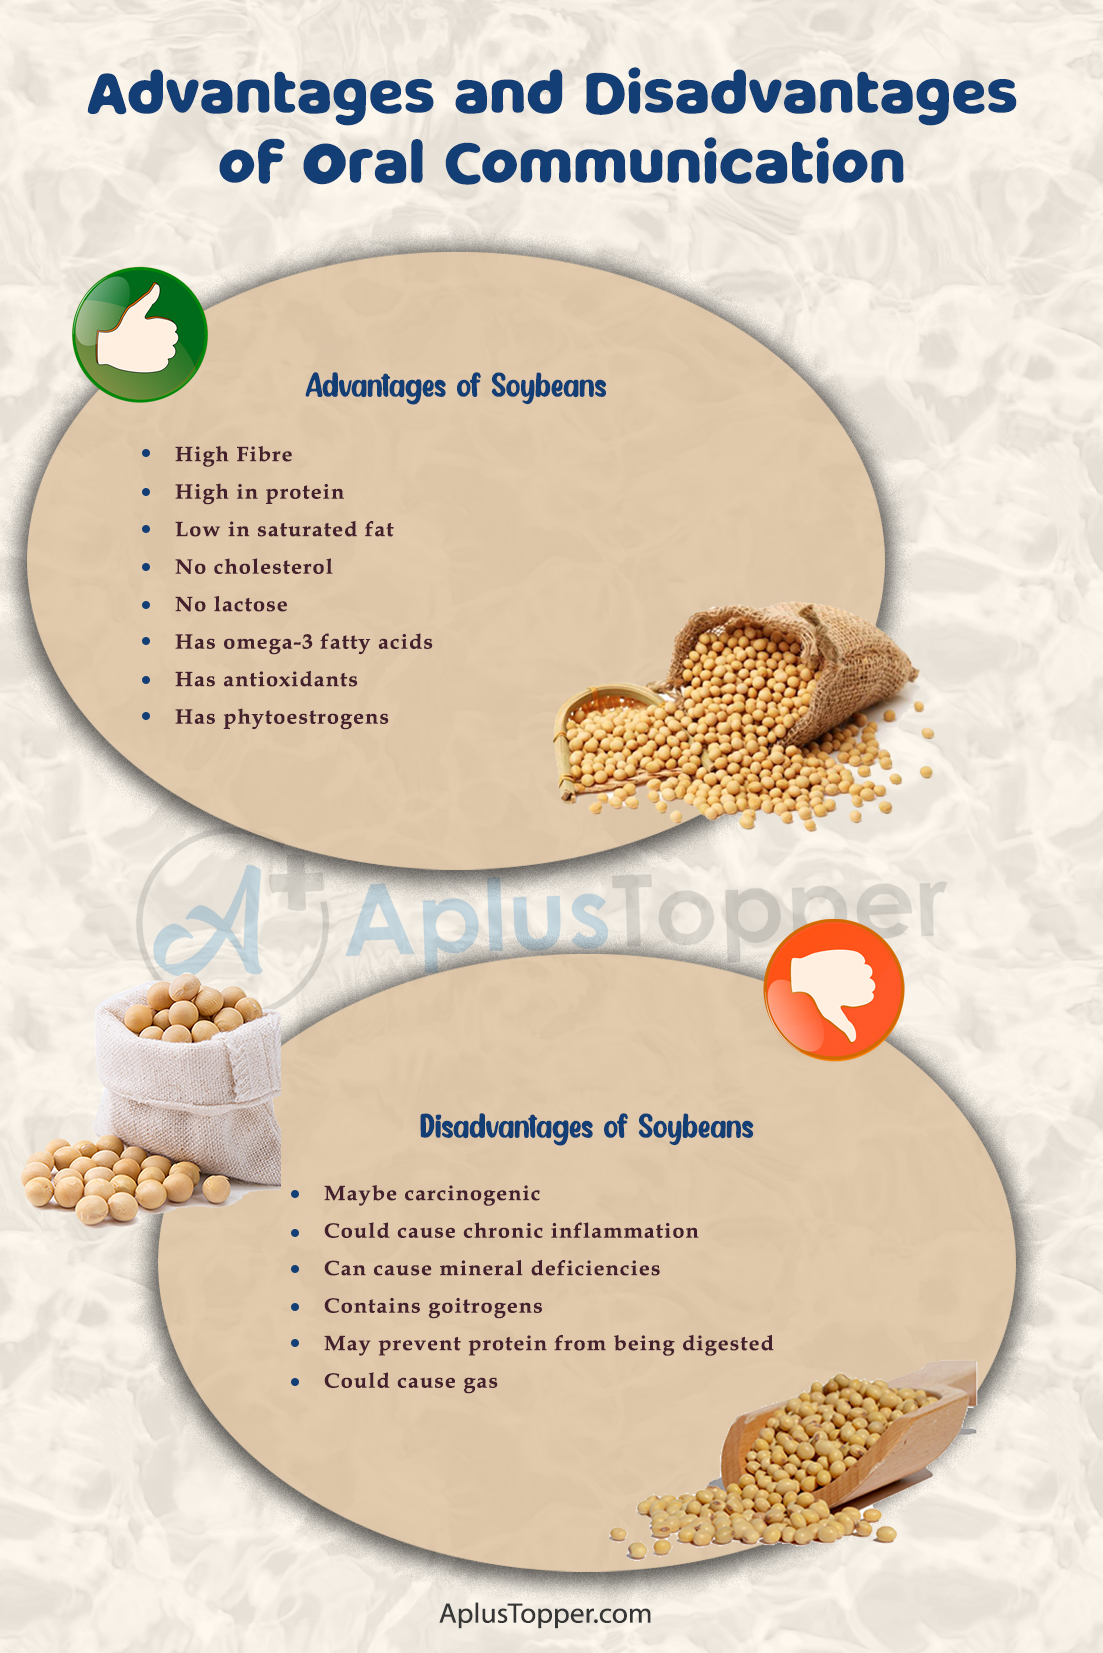 Advantages and Disadvantages of Soybeans 2